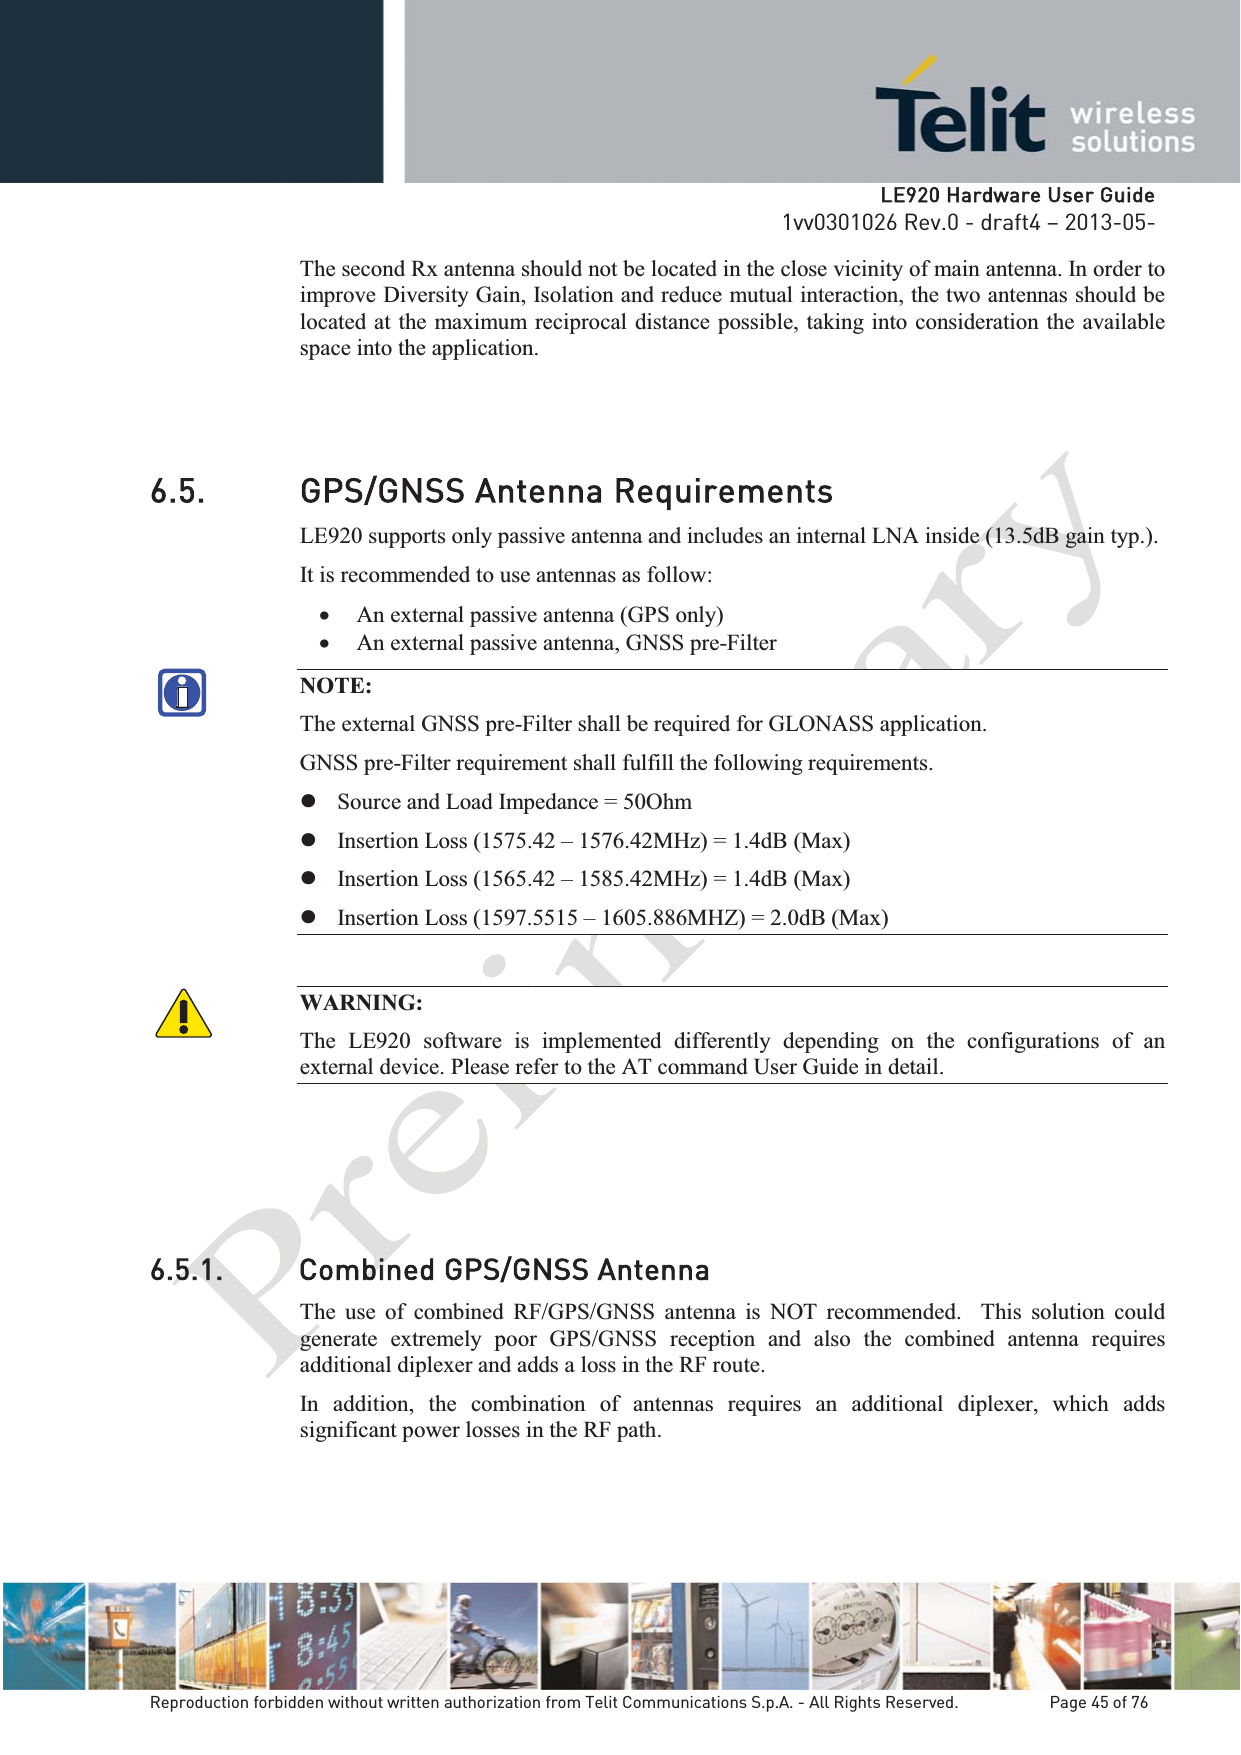   LLE920 Hardware User Guide1vv0301026 Rev.0 - draft4 – 2013-05-Reproduction forbidden without written authorization from Telit Communications S.p.A. - All Rights Reserved.    Page 45 of 76 The second Rx antenna should not be located in the close vicinity of main antenna. In order to improve Diversity Gain, Isolation and reduce mutual interaction, the two antennas should be located at the maximum reciprocal distance possible, taking into consideration the available space into the application.   6.5. GPS/GNSS Antenna Requirements LE920 supports only passive antenna and includes an internal LNA inside (13.5dB gain typ.). It is recommended to use antennas as follow: x An external passive antenna (GPS only) x An external passive antenna, GNSS pre-Filter  NOTE: The external GNSS pre-Filter shall be required for GLONASS application.GNSS pre-Filter requirement shall fulfill the following requirements. z Source and Load Impedance = 50Ohm z Insertion Loss (1575.42 – 1576.42MHz) = 1.4dB (Max) z Insertion Loss (1565.42 – 1585.42MHz) = 1.4dB (Max) z Insertion Loss (1597.5515 – 1605.886MHZ) = 2.0dB (Max) WARNING: The LE920 software is implemented differently depending on the configurations of an external device. Please refer to the AT command User Guide in detail. 6.5.1. Combined GPS/GNSS Antenna The use of combined RF/GPS/GNSS antenna is NOT recommended.  This solution could generate extremely poor GPS/GNSS reception and also the combined antenna requires additional diplexer and adds a loss in the RF route. In addition, the combination of antennas requires an additional diplexer, which adds significant power losses in the RF path. 